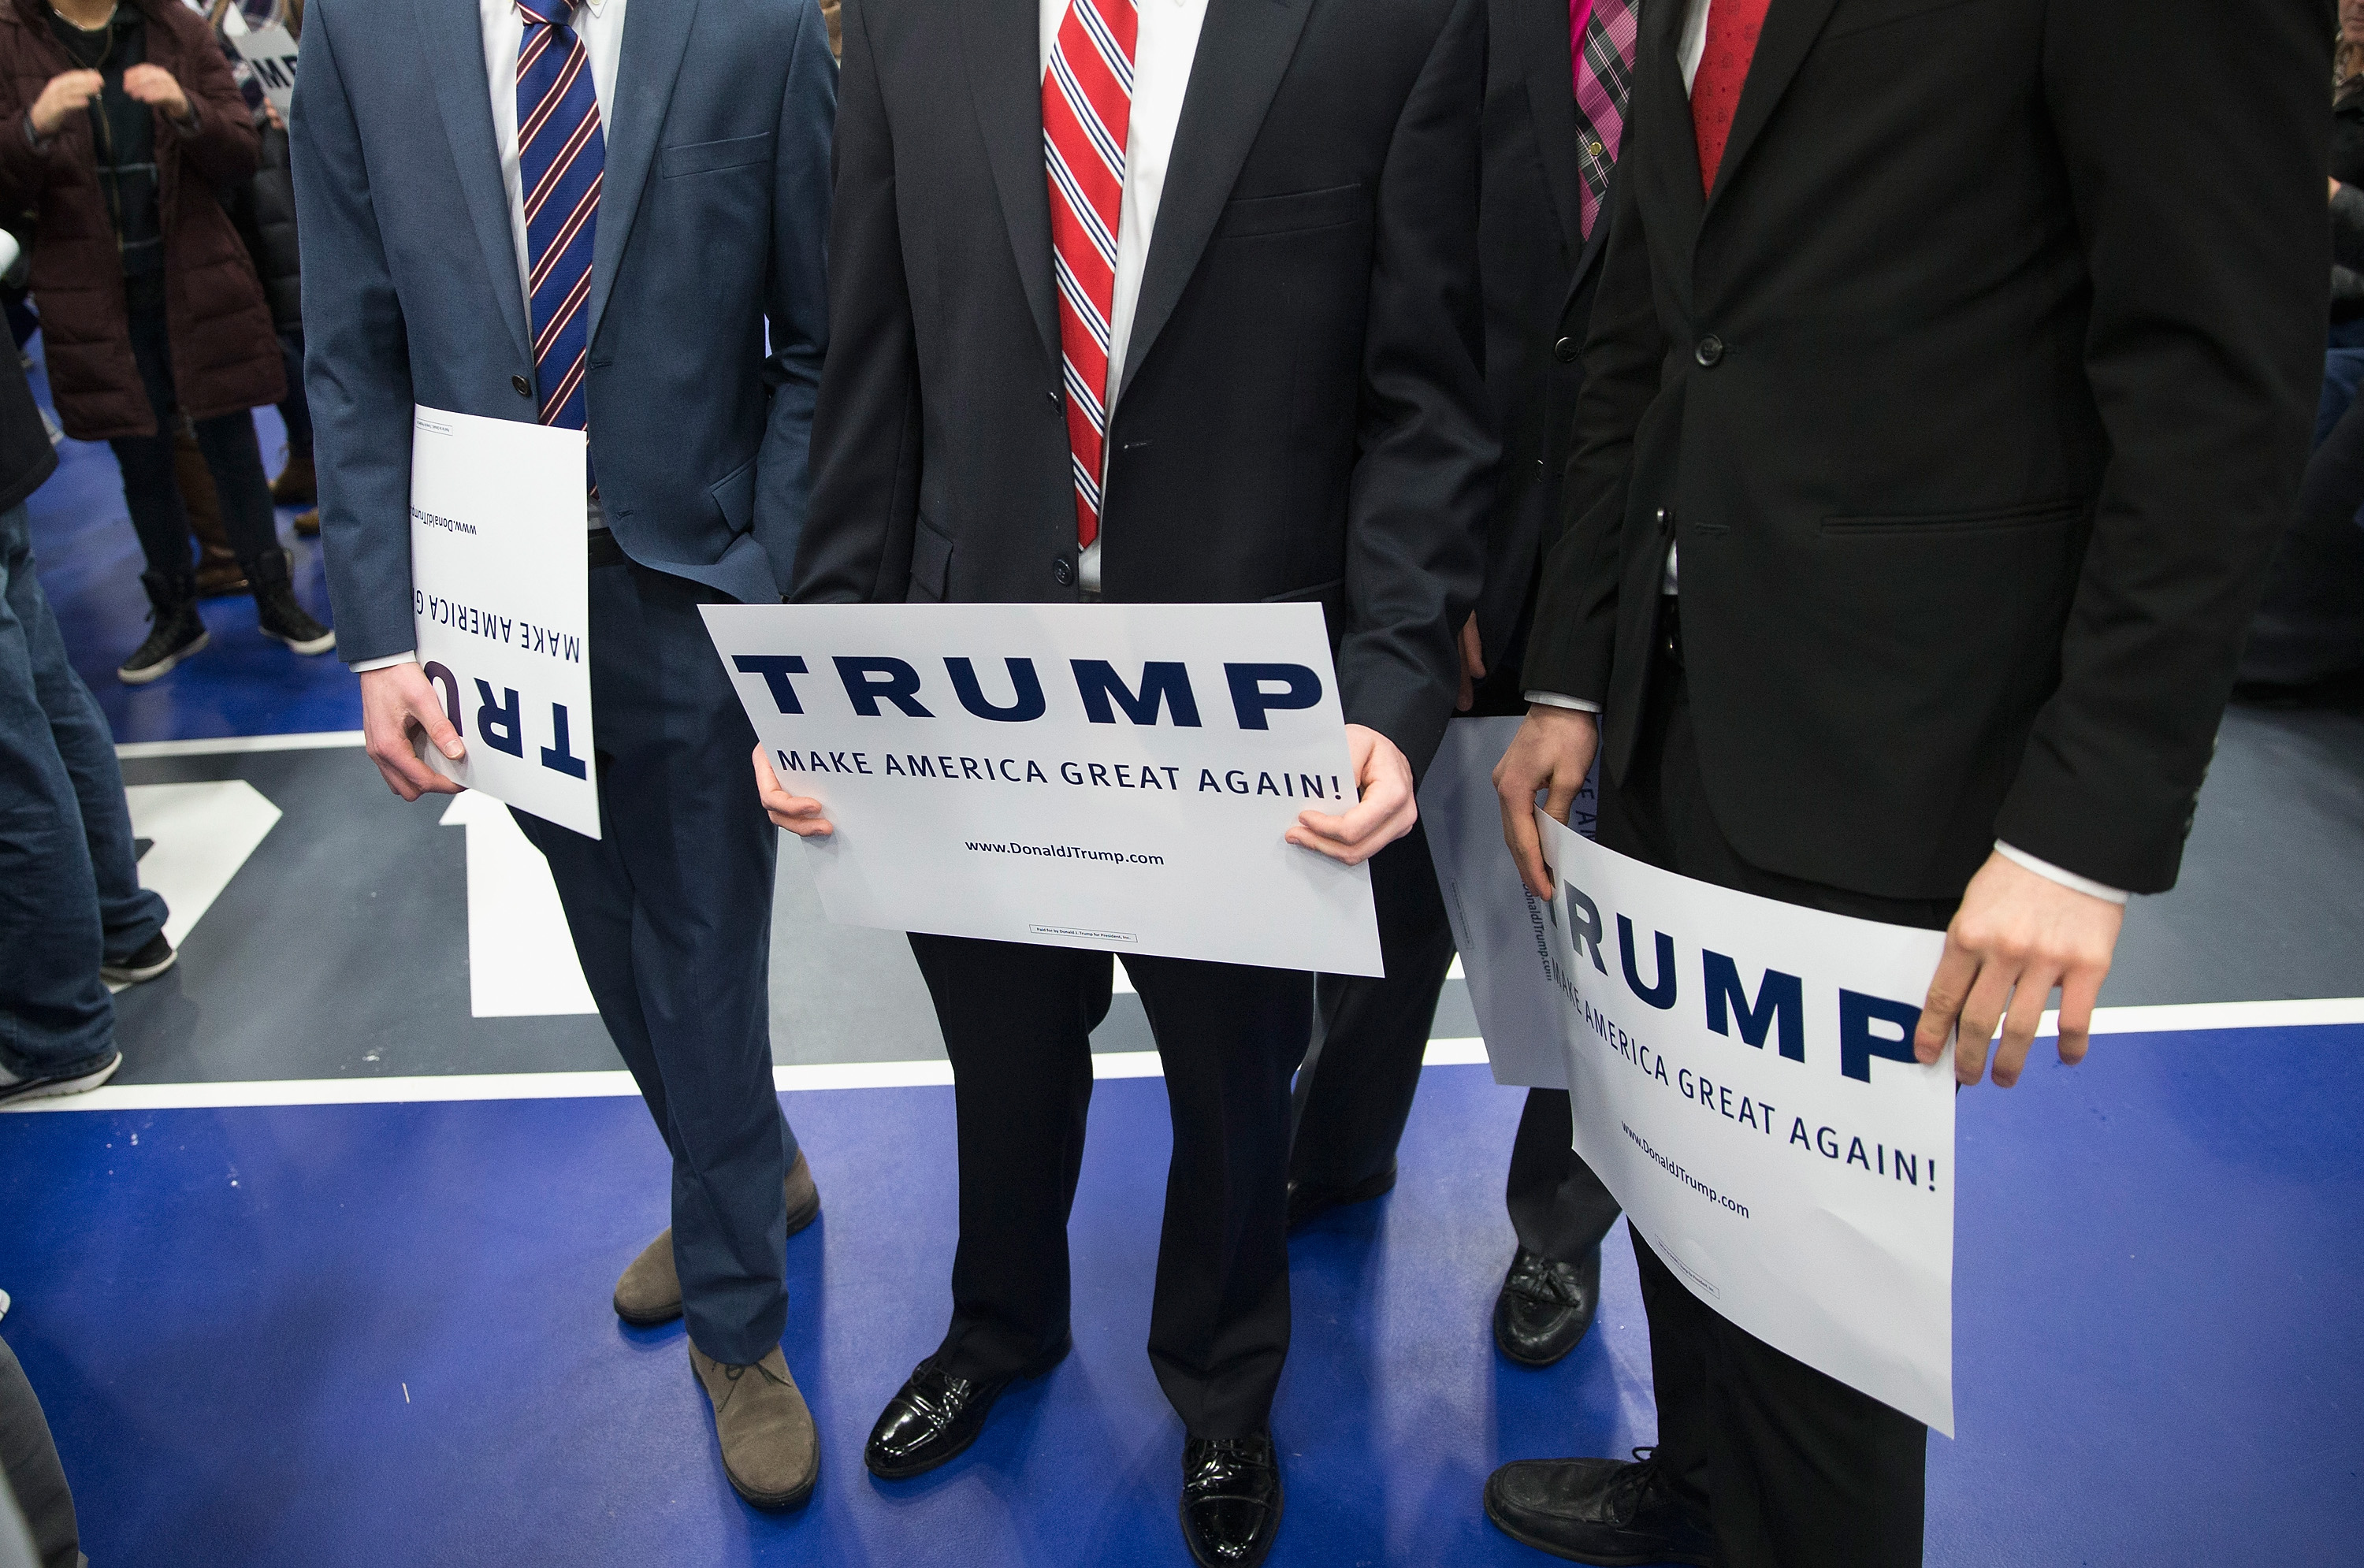 Men hold signs while waiting for Republican presidential candidate Donald Trump to arrive for a rally at Macomb Community College in Warren, Mich., on March 4, 2016. (Scott Olson—Getty Images)